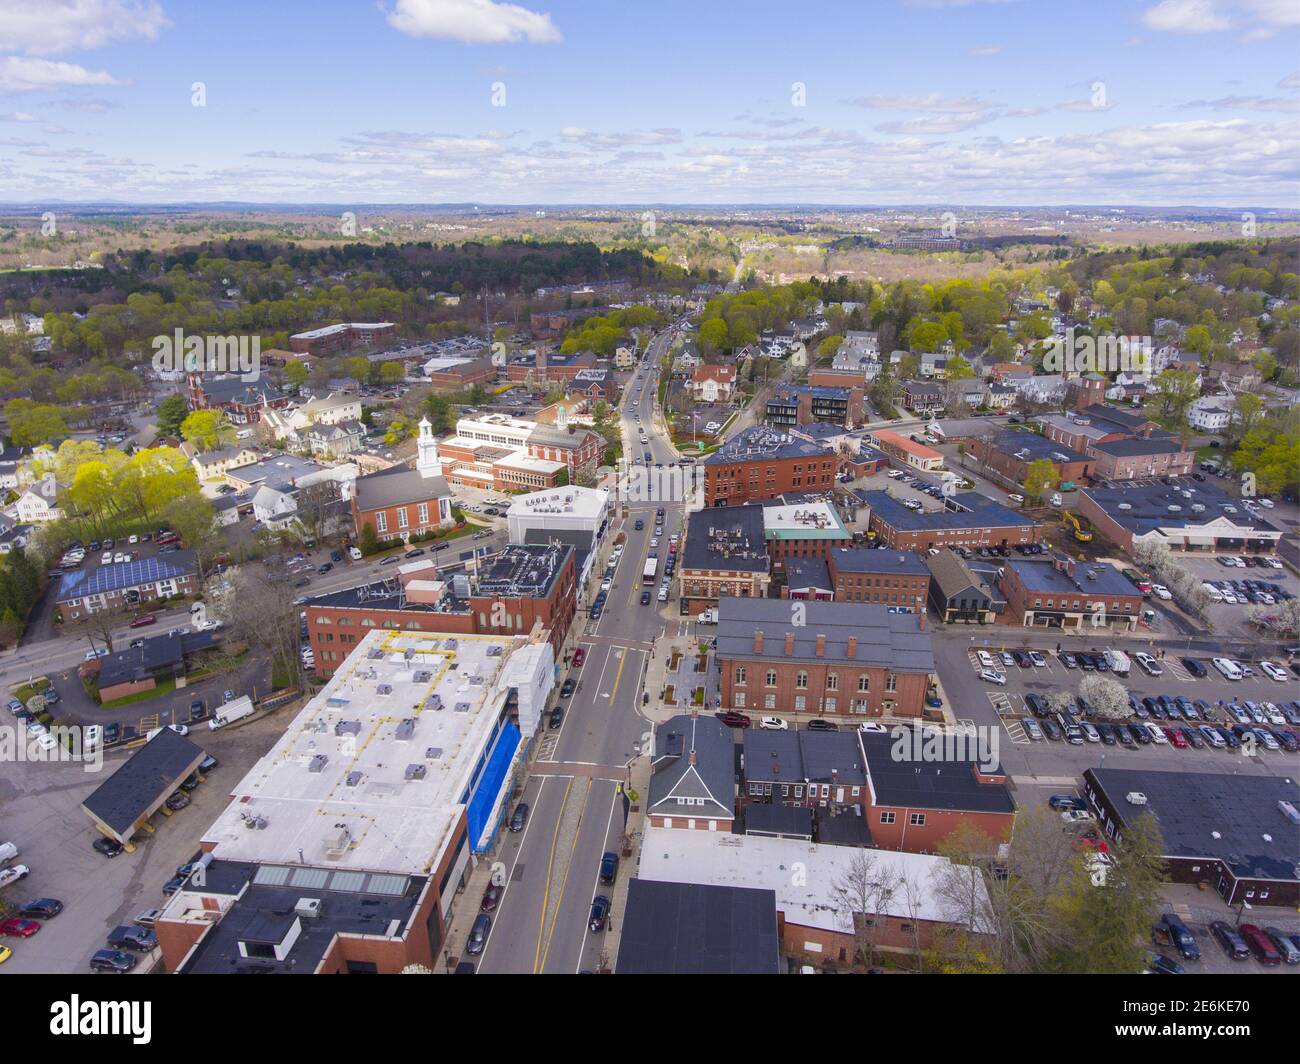 Aerial View Of Historic Center Of Andover On Main Street In Andover